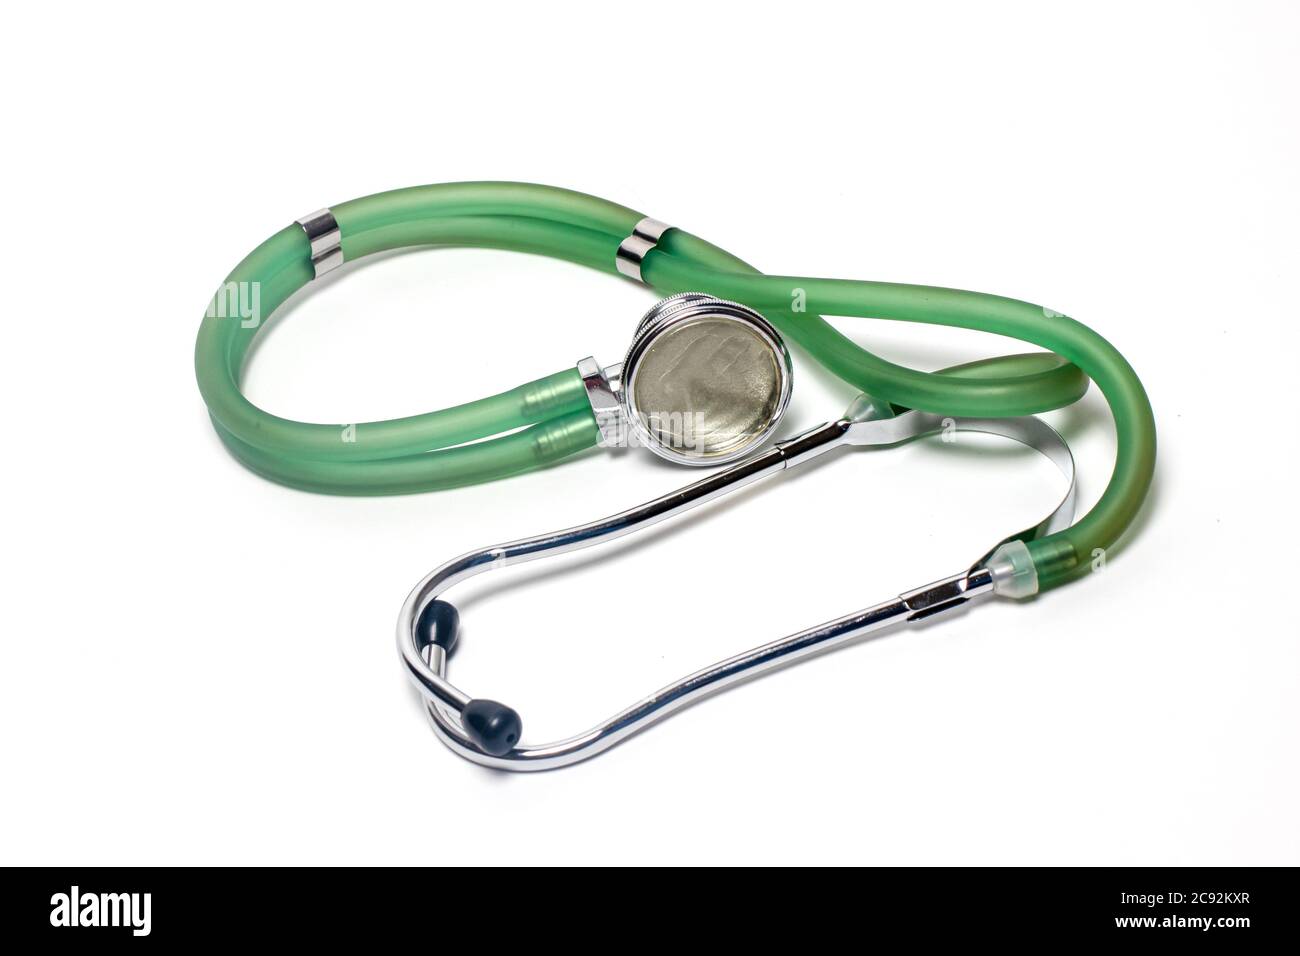 Green medical stethoscope on a white background Stock Photo